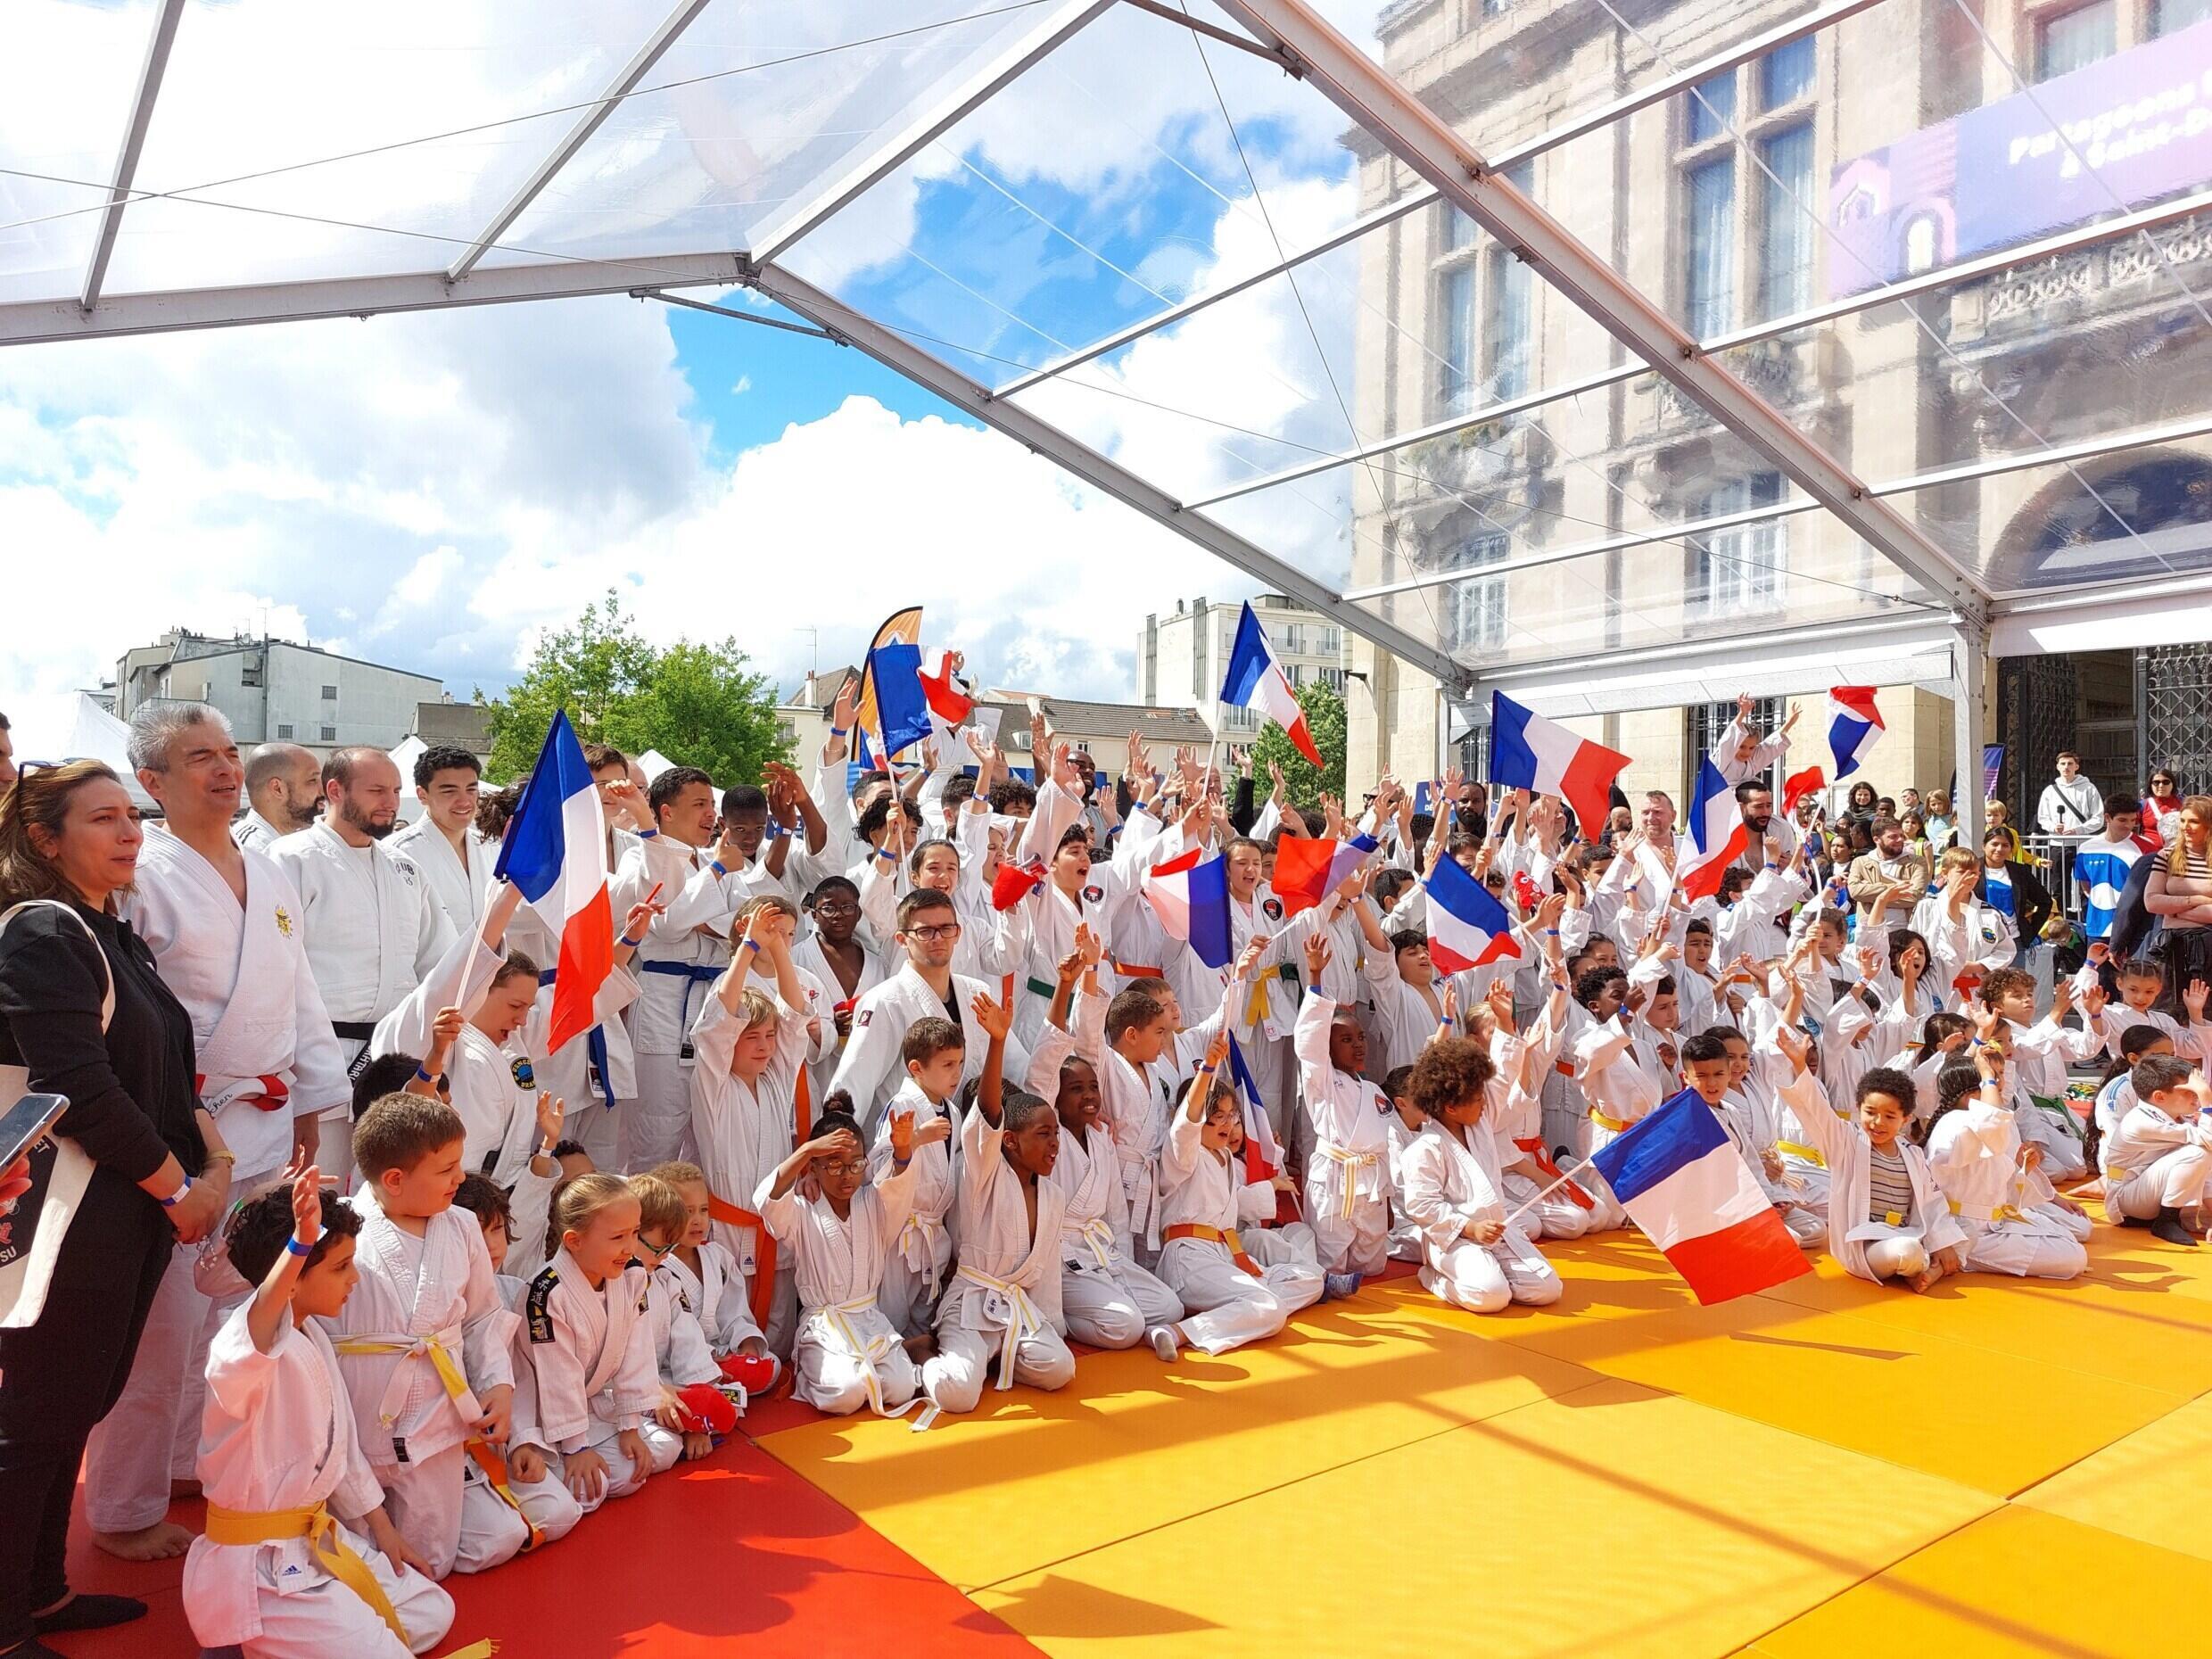 There were 200 apprentice judokas from Seine-Saint-Denis who came to meet their idol.